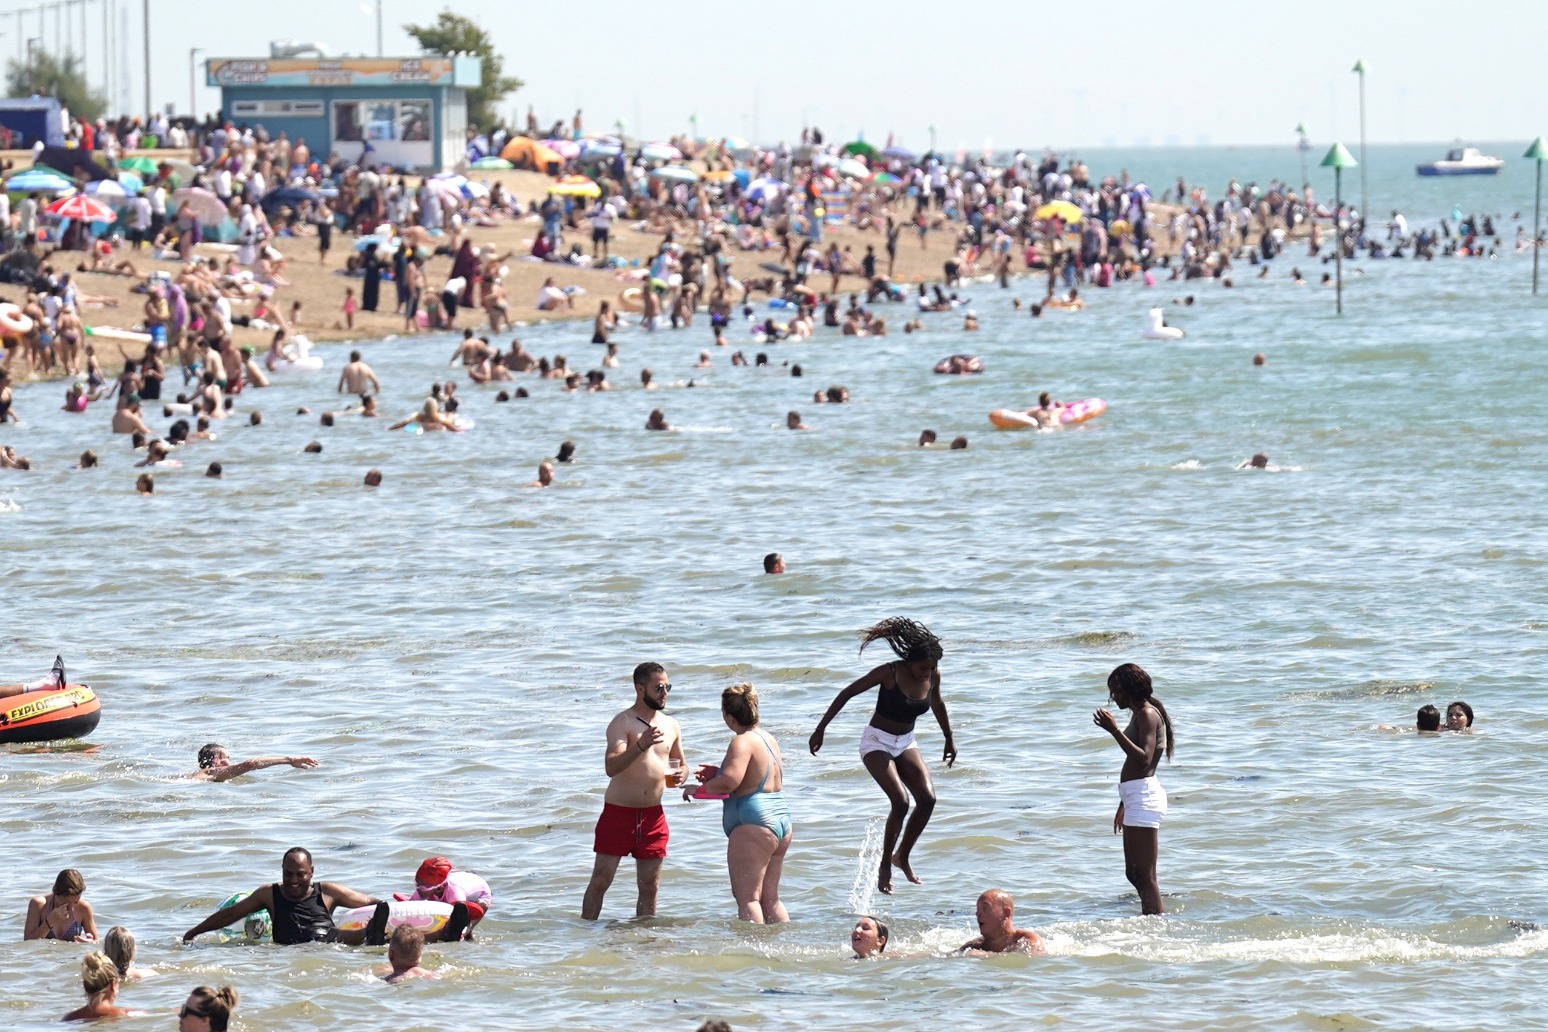 England has had joint hottest summer on record, Met Office figures show 